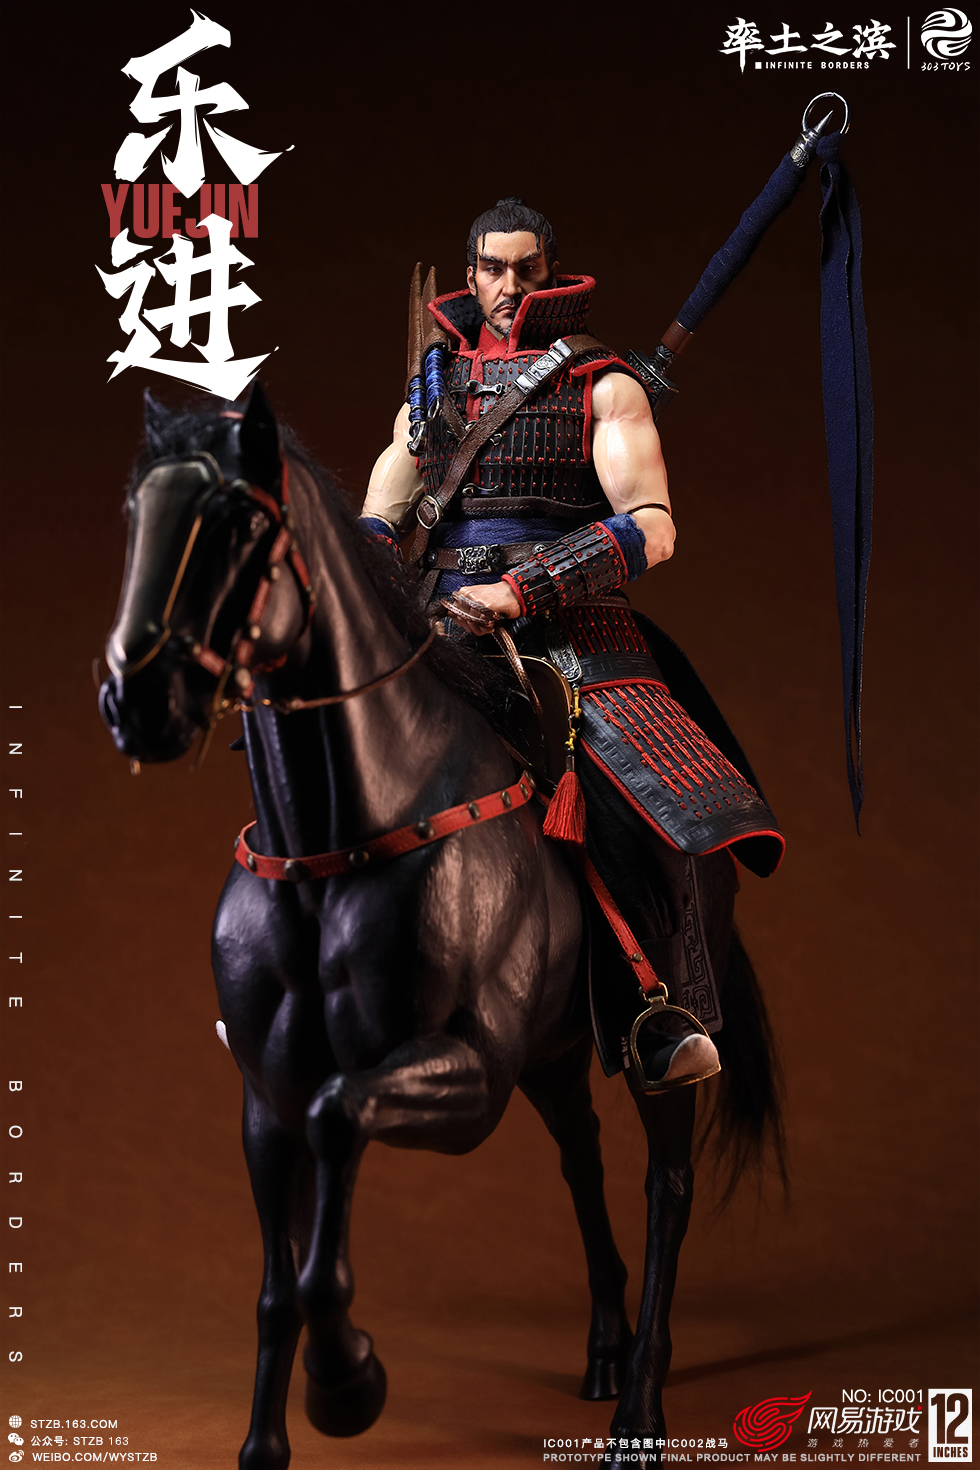 copper - NEW PRODUCT: Toyoshi Shore × 303 TOYS -  Five Sons of Elite Generals - Lejin IC001/War Horse Feidian IC002 05160